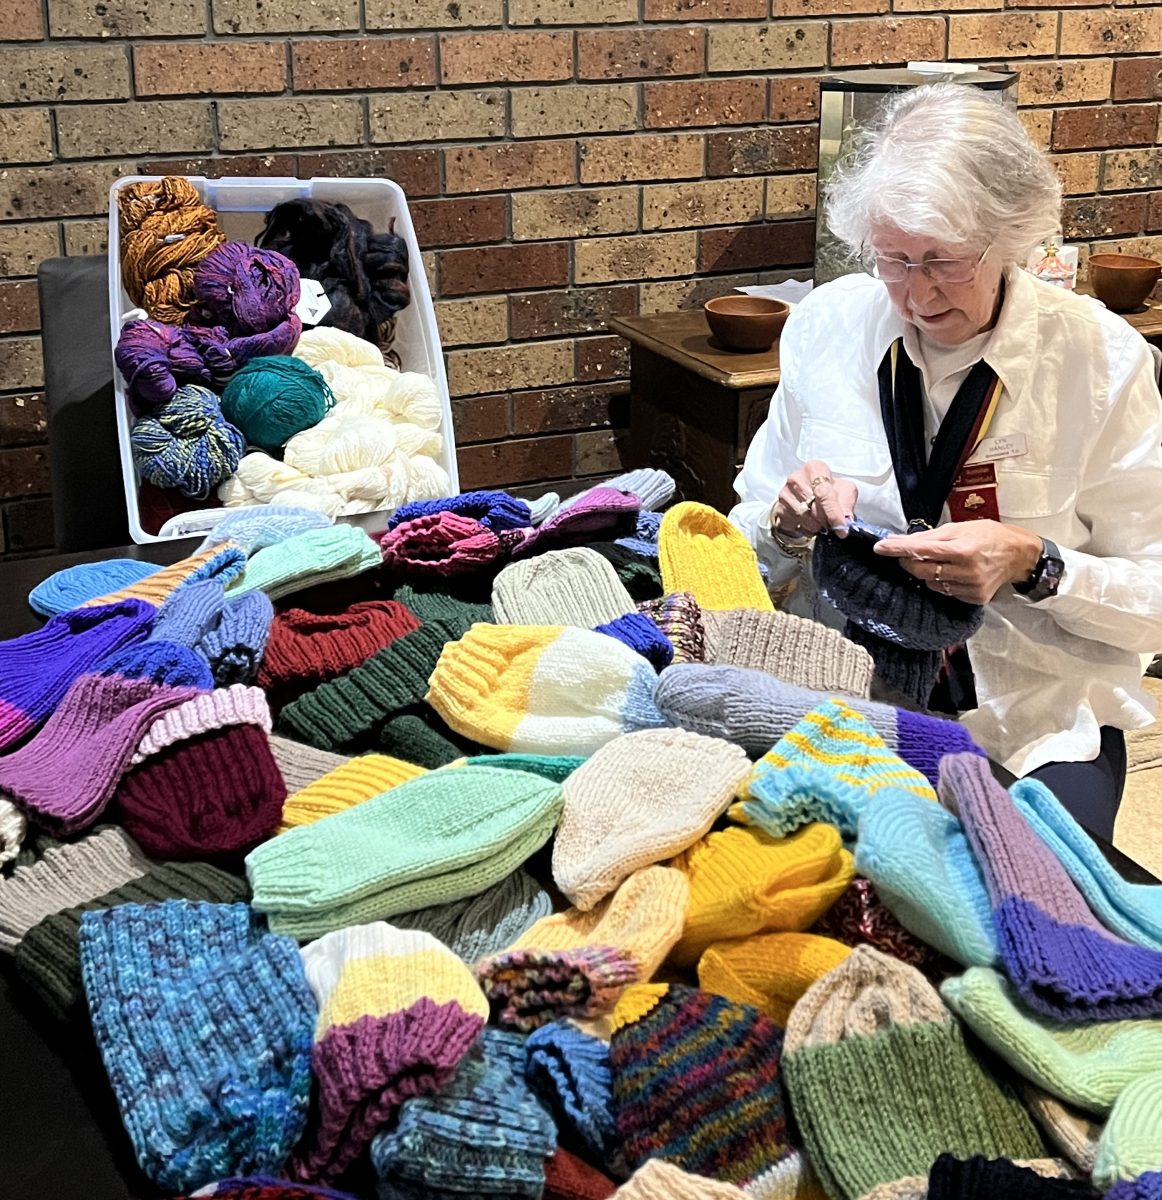 Lyn Hanley knitting surrounded by beanies